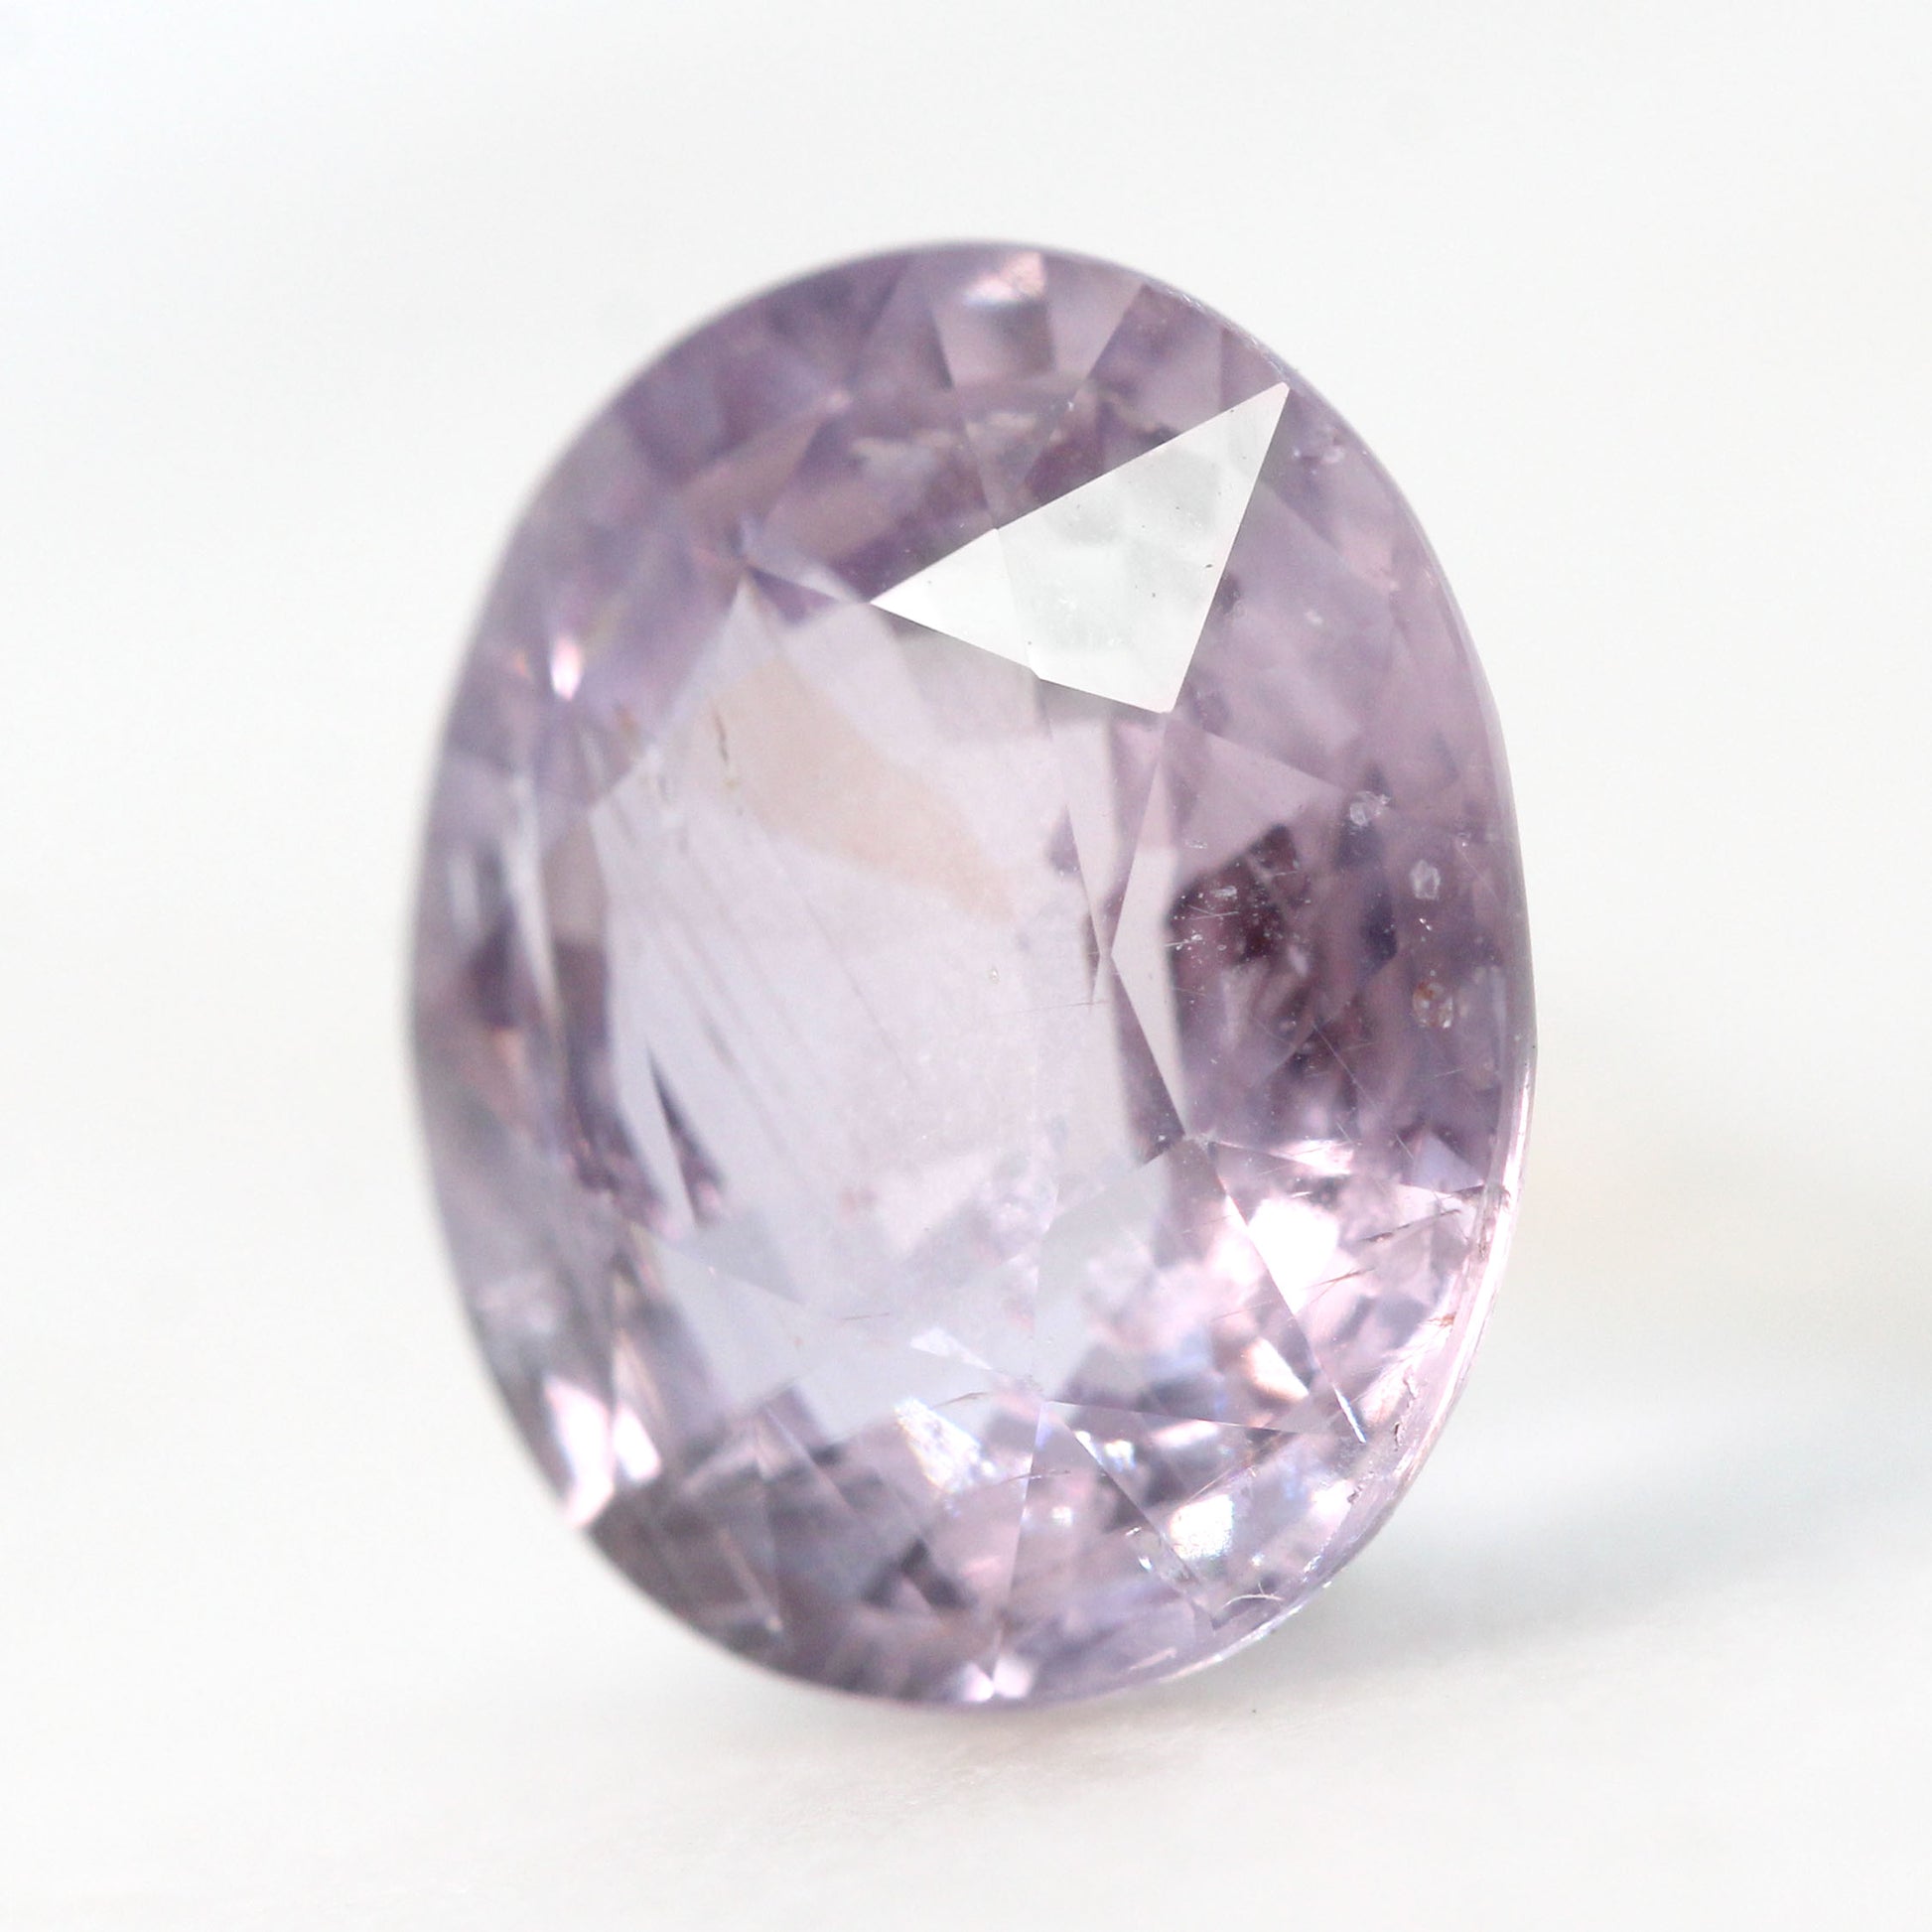 CAELEN (M) 6.11 Carat Purple Oval Sapphire for Custom Work - Inventory Code POSAP611 - Midwinter Co. Alternative Bridal Rings and Modern Fine Jewelry